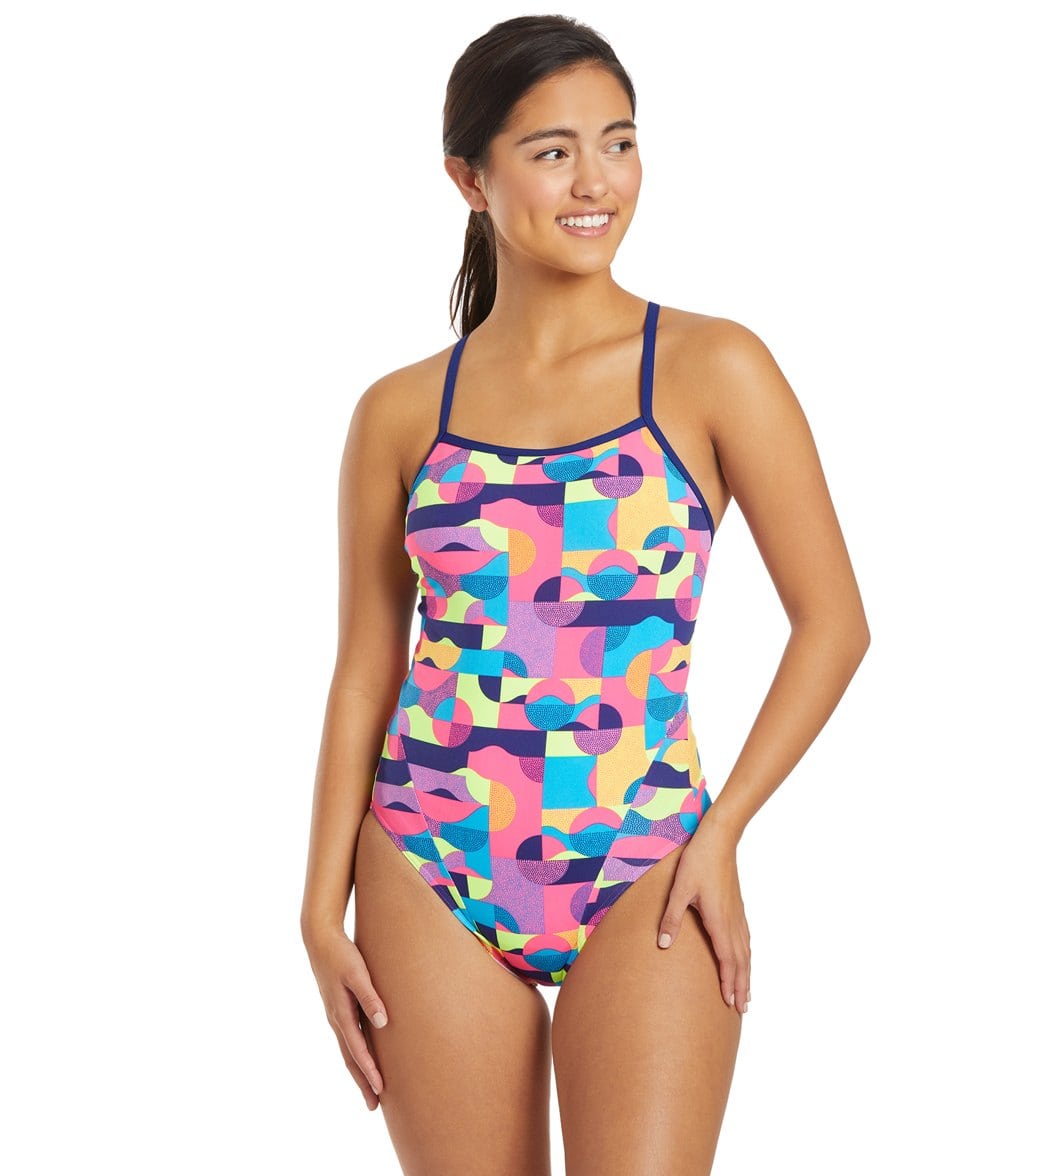 Funkita Women's Mad Mist Single Strap One Piece Swimsuit - Multi/Pink 36 Polyester - Swimoutlet.com